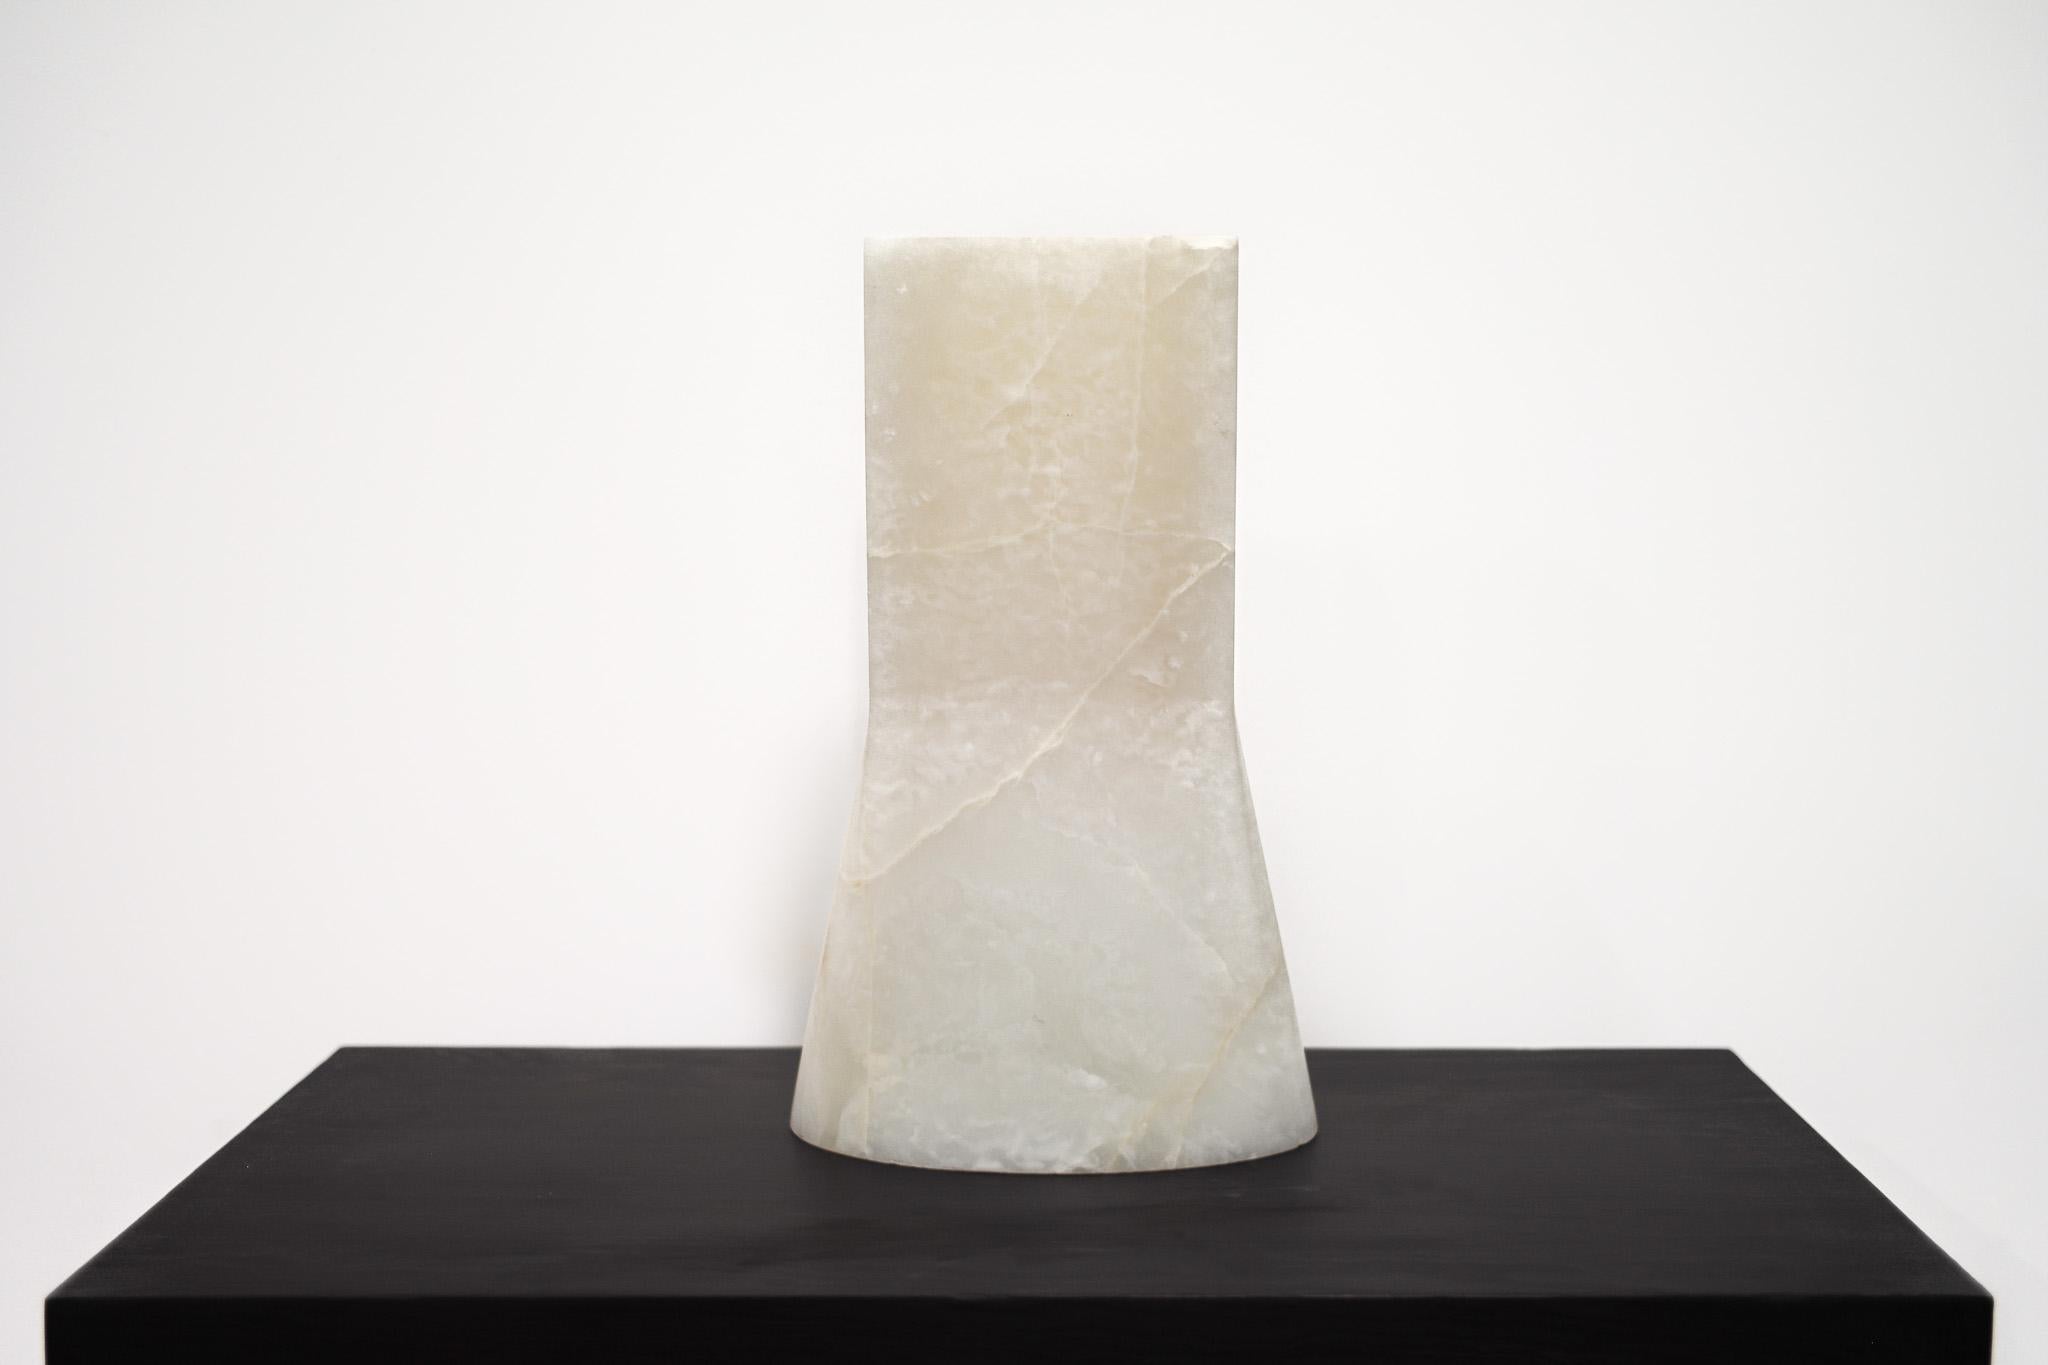 Oval Vase by Lucas Tyra Morten
2021
Limited edition of 10
Dimensions: W 30 x D 16 x H 50 cm
Material: Natural onyx stone

Occupying the liminal space between art and design, the multidisciplinary atelier of Lucas and Tyra Morten is a small scale